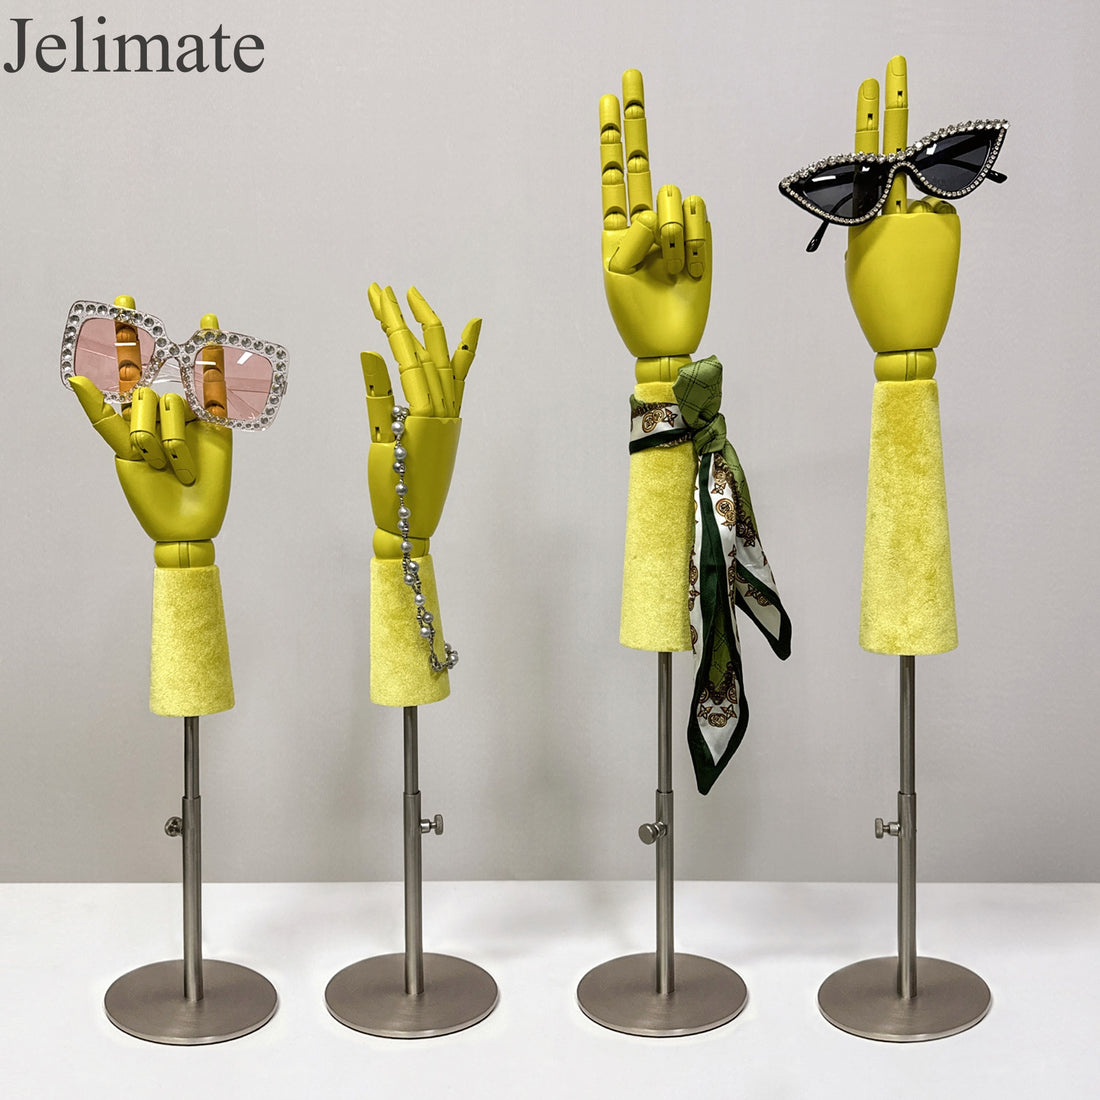 Why Jelimate Colorful Female Wooden Mannequin Hand With Velvet Handle With Silver Base is the Perfect Accent for Your Boutique Displays?